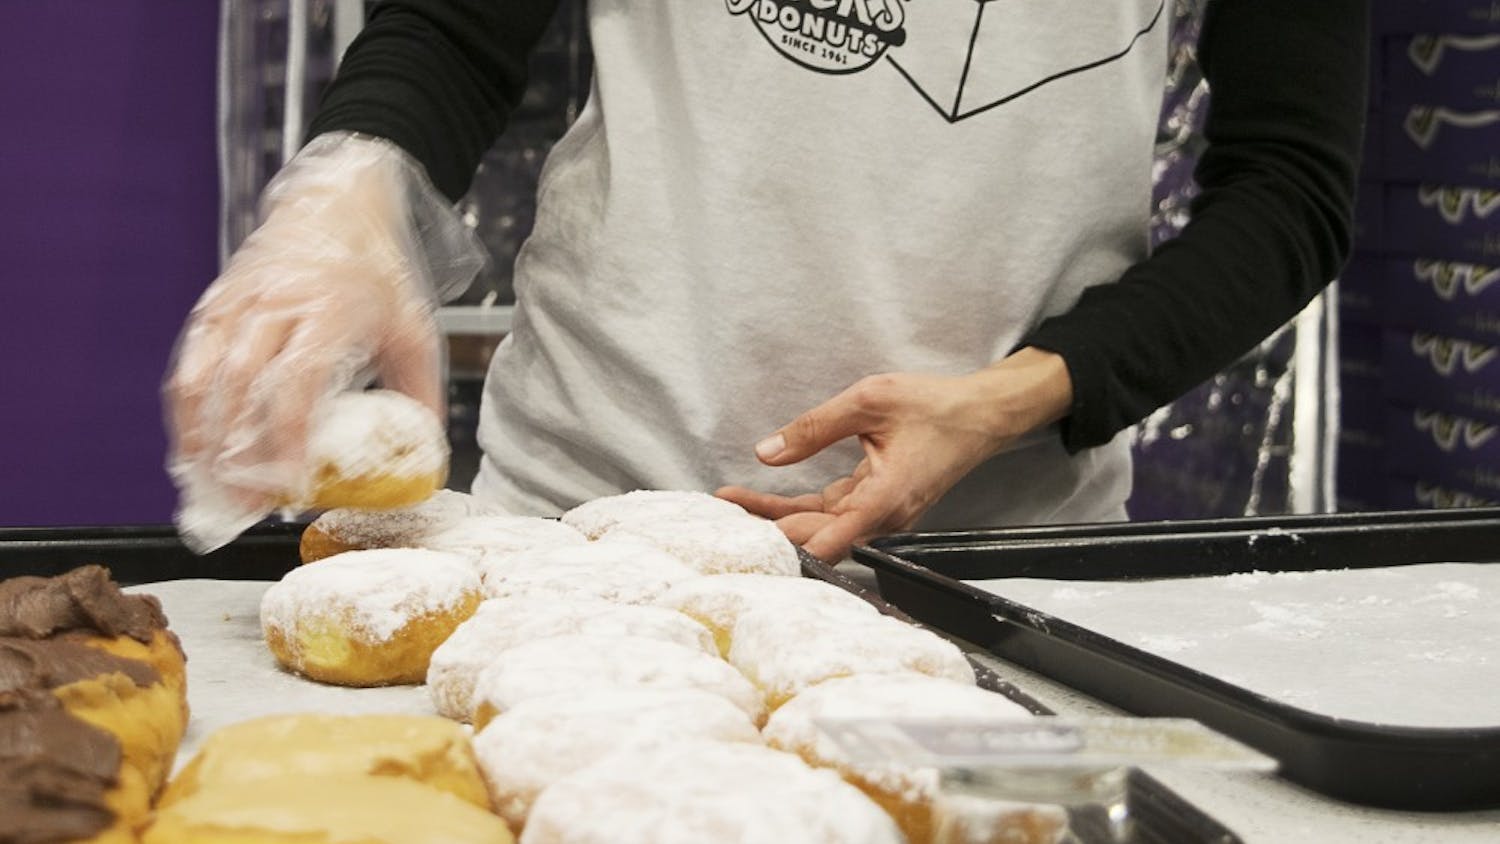 Jack's Donuts team member Jackie Willett transfers doughnuts to a tray in Jack's Donuts' Bloomington location on College Mall Road. Jack's Donuts, which originally opened in New Castle, Indiana, serves coffee and donuts.